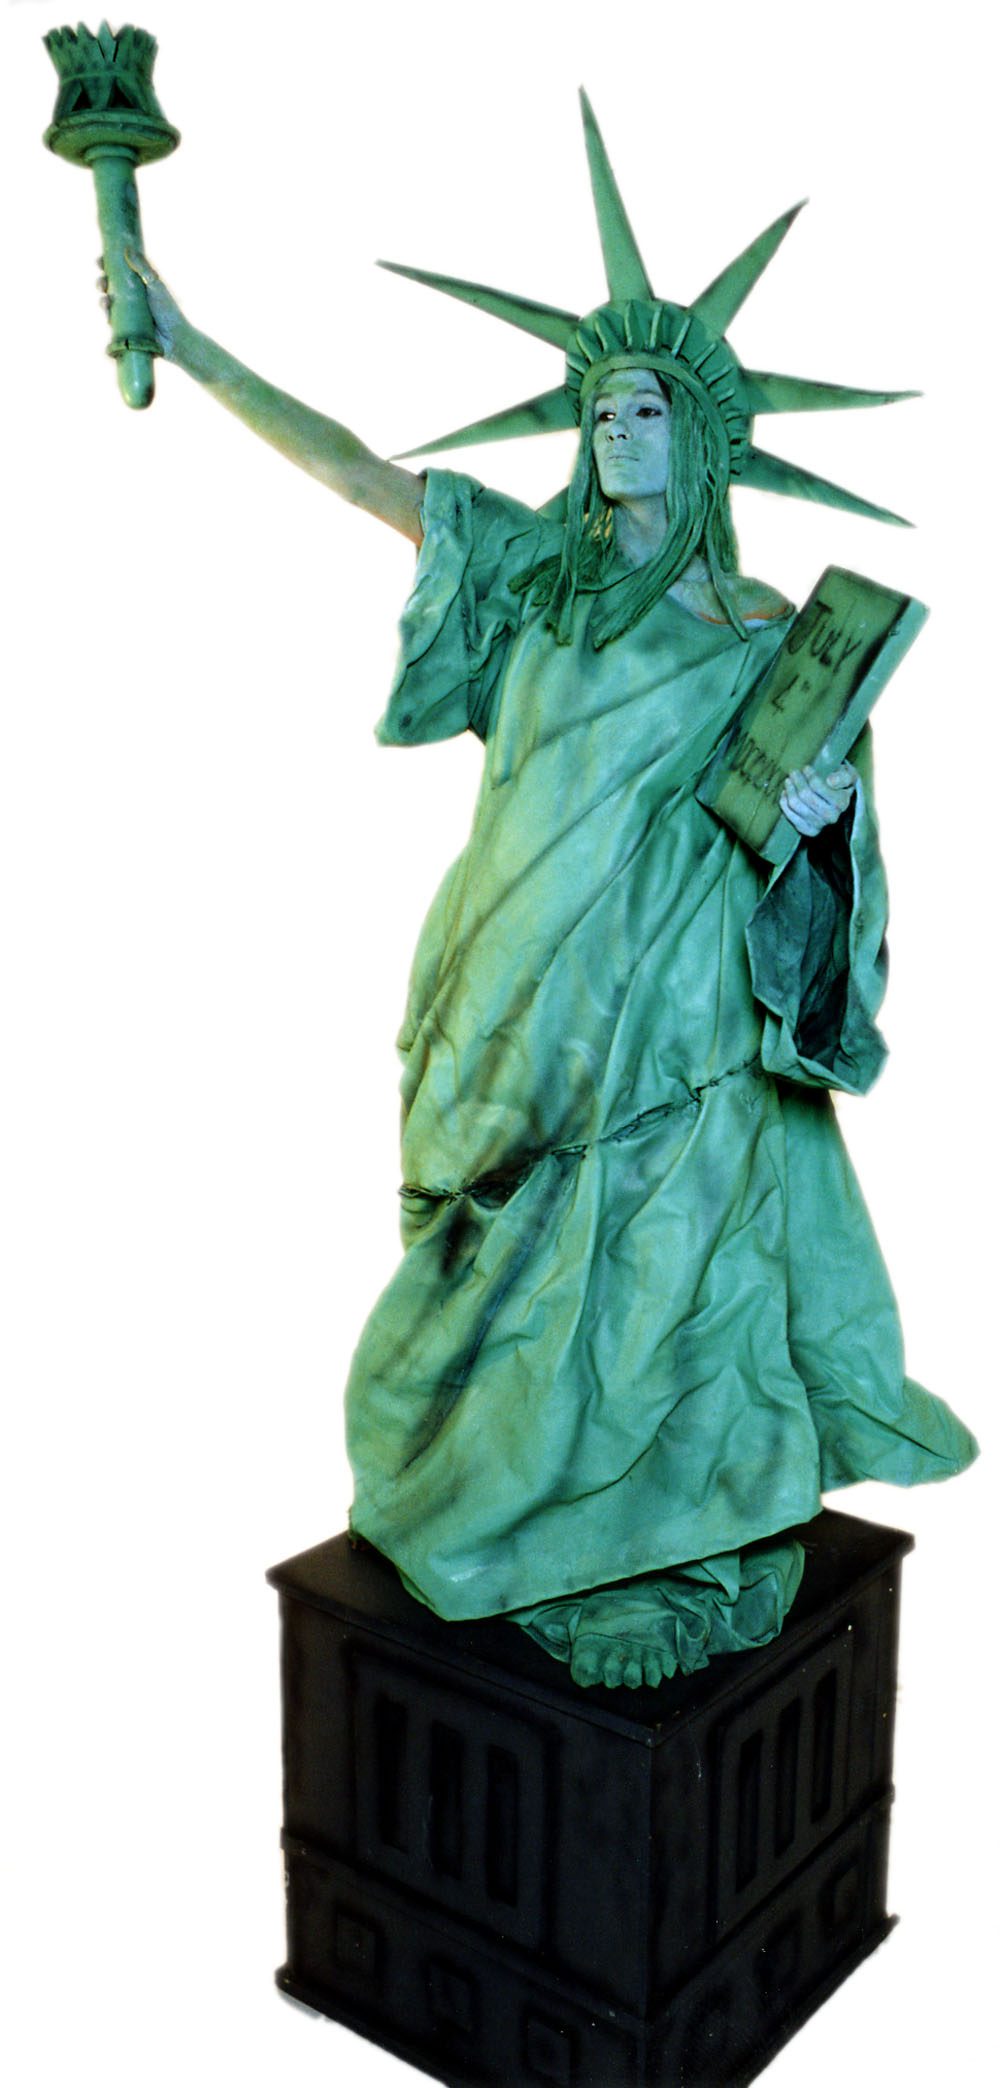 independence day theme statue